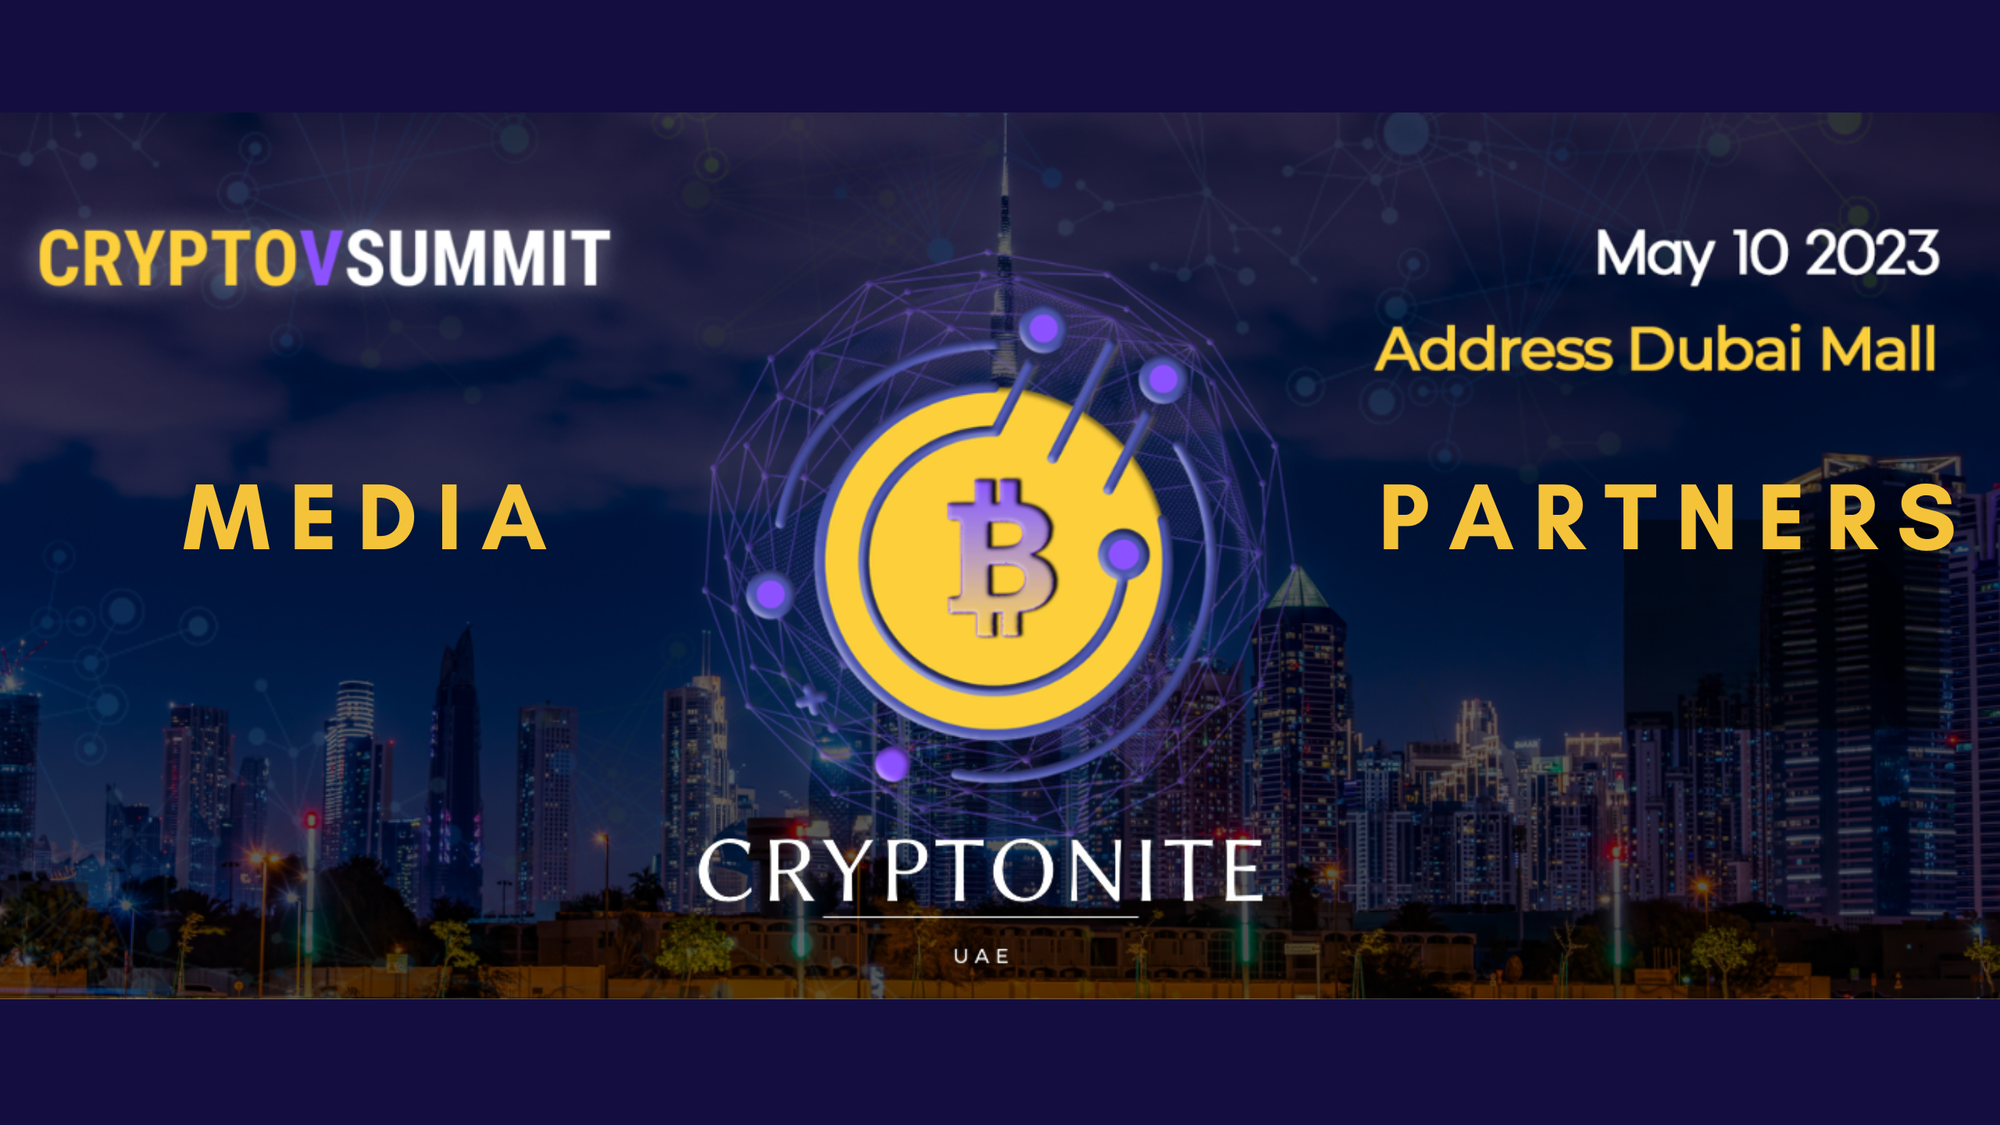 CRYPTOVSUMMIT to Highlight Latest Developments in Cryptocurrency Industry in Dubai on May 10th, 2023.